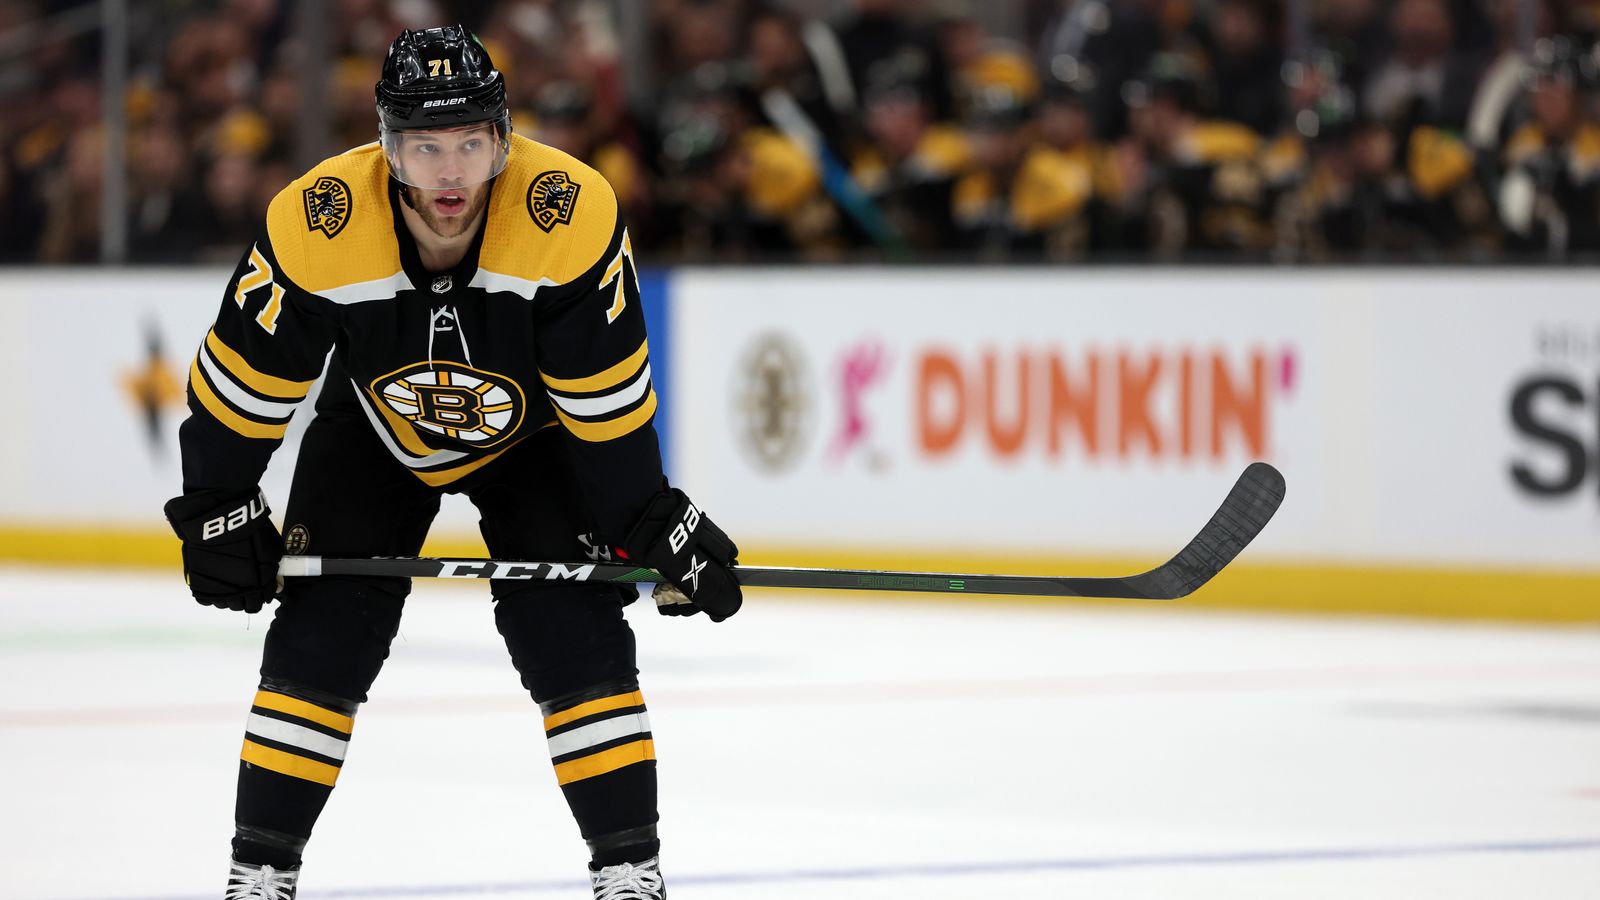 Bruins' Taylor Hall is nearing a return ahead of a promising Cup run